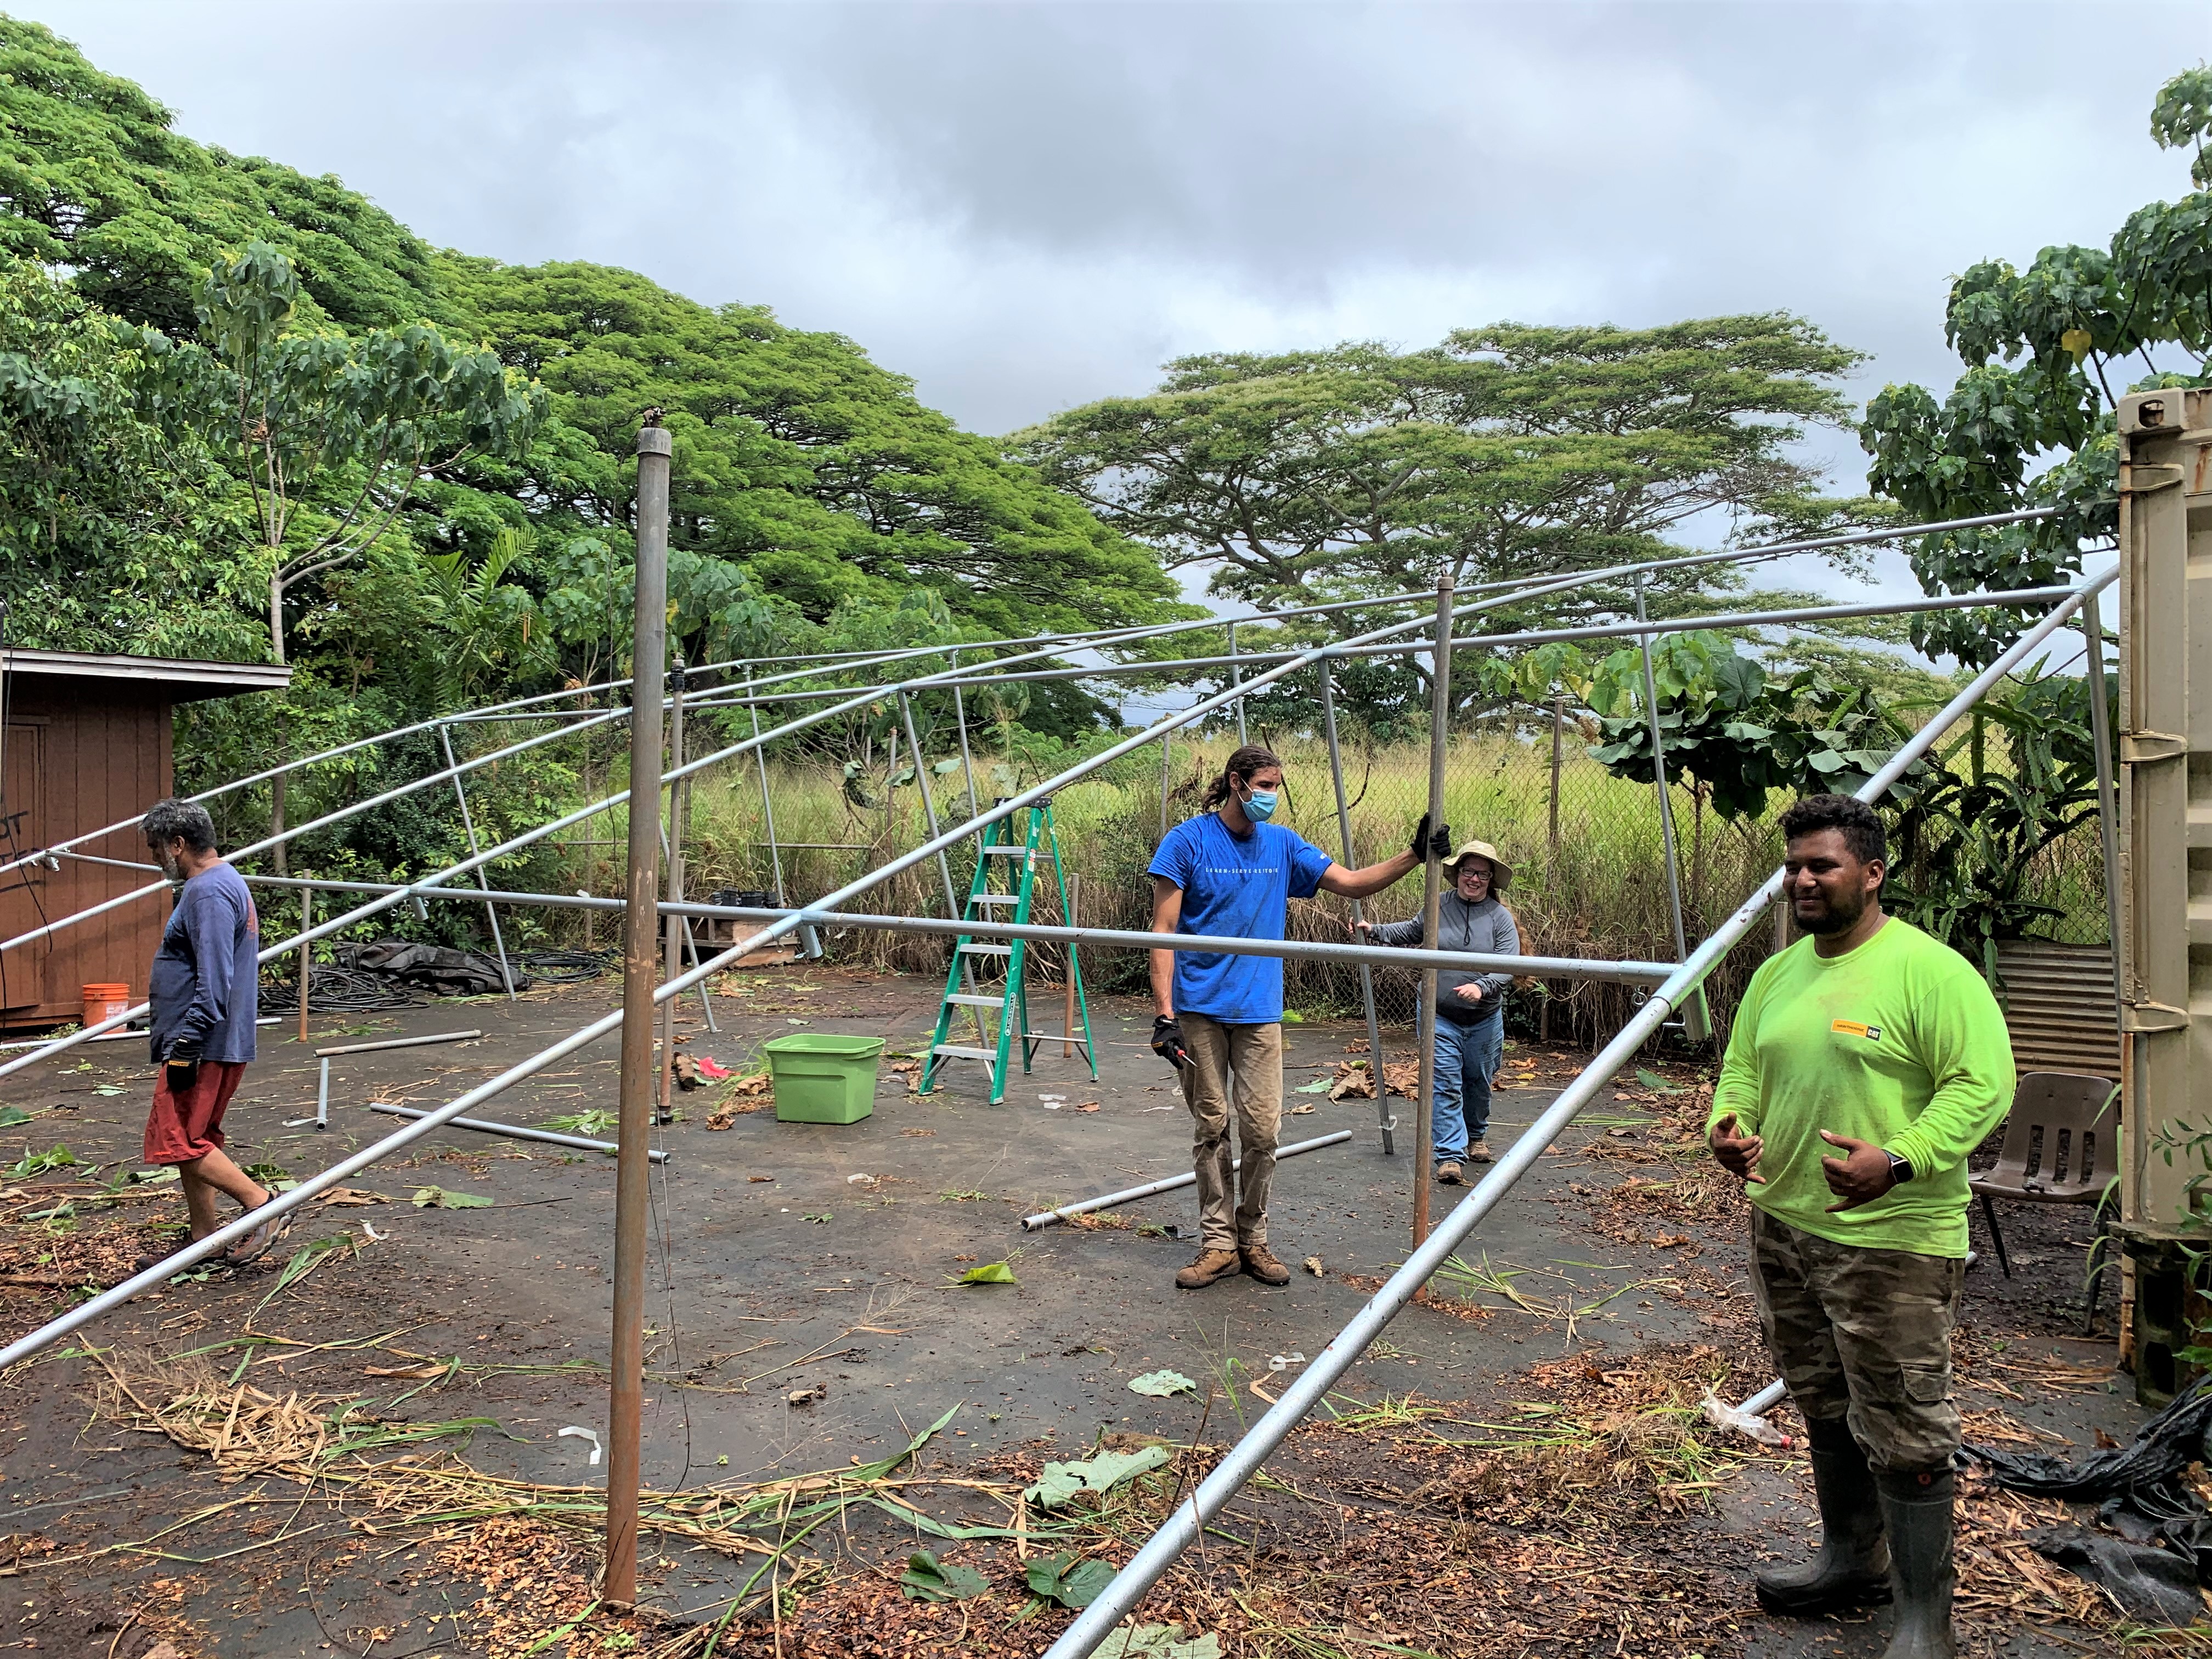 Pearl City High School teacher, Jessica Stoerger, works alongside community members to build a native plant shade house that will serve as a plant nursery for local nonprofit organizations.